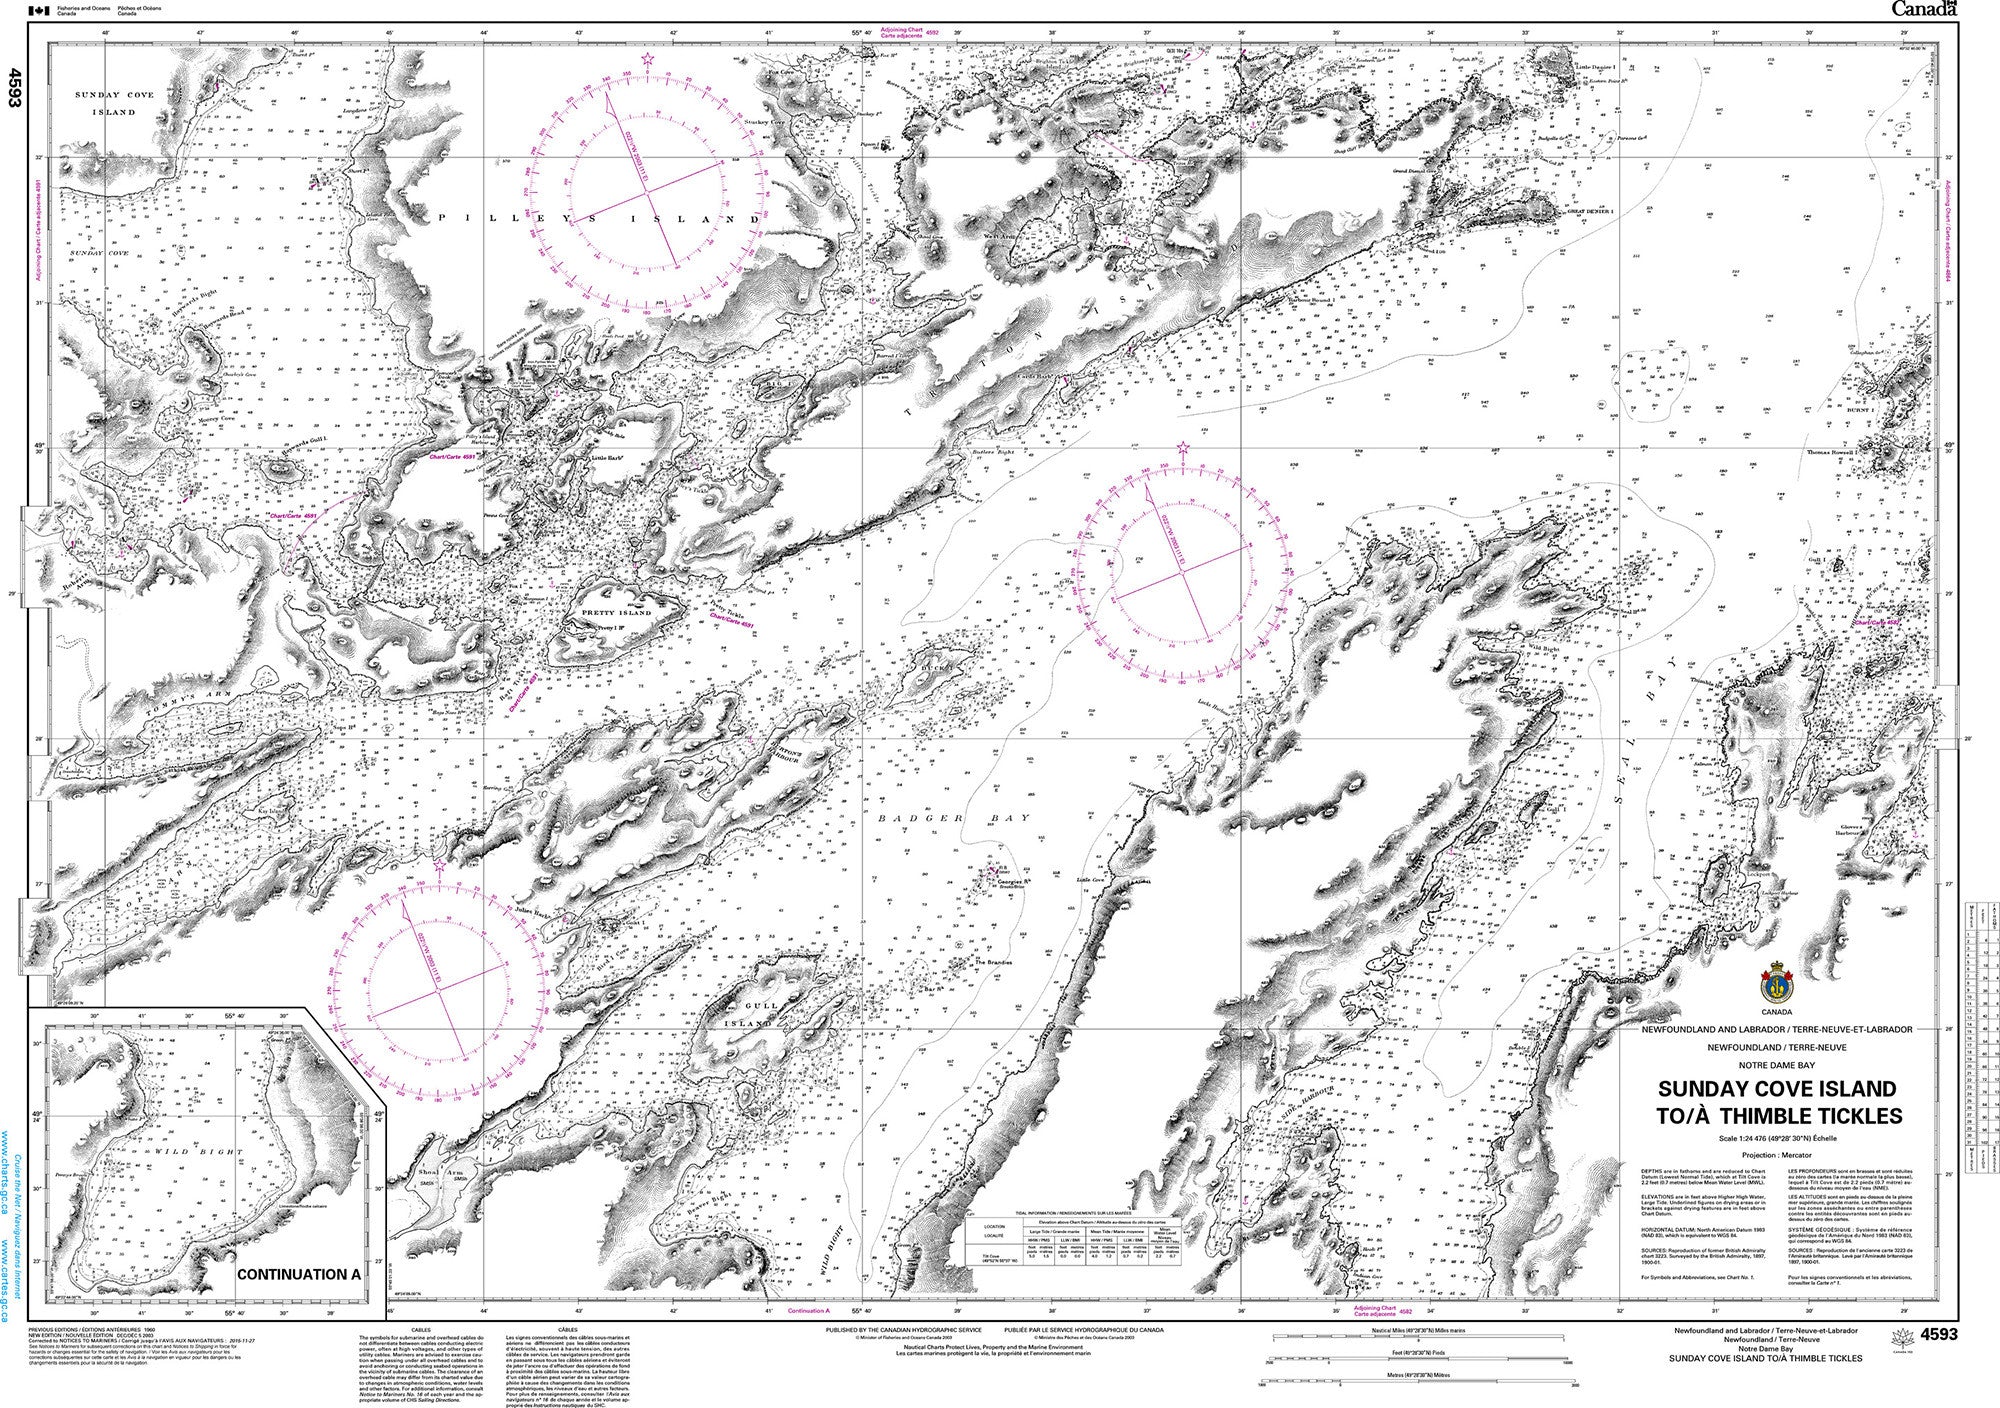 Canadian Hydrographic Service Nautical Chart CHS4593: Sunday Cove Island to/à Thimble Tickles